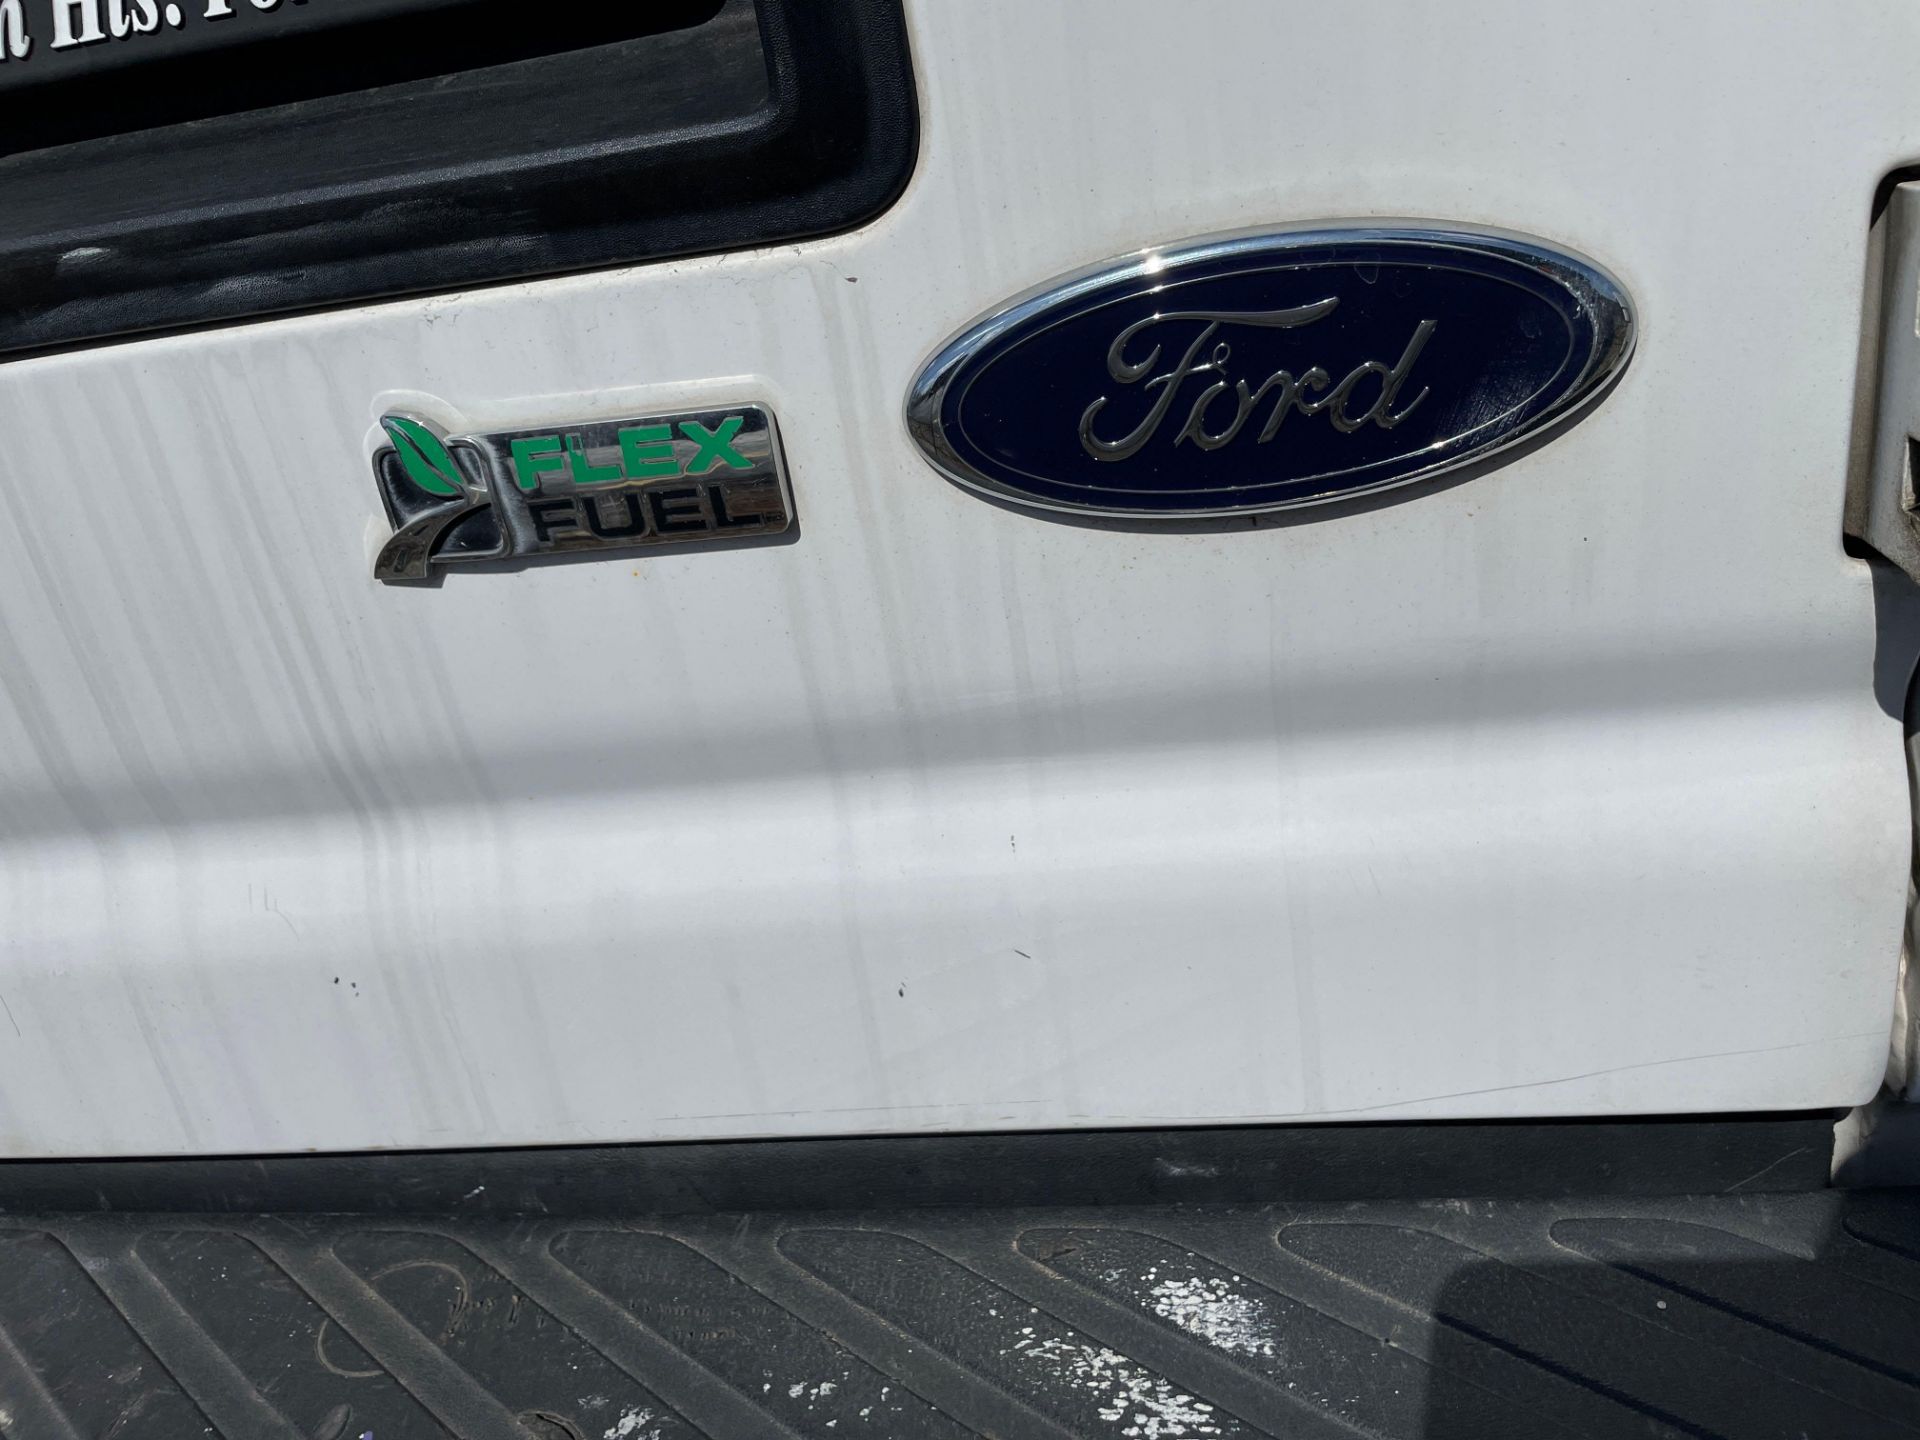 2014 FORD E-350 SUPER DUTY CARGO VAN - Image 7 of 37